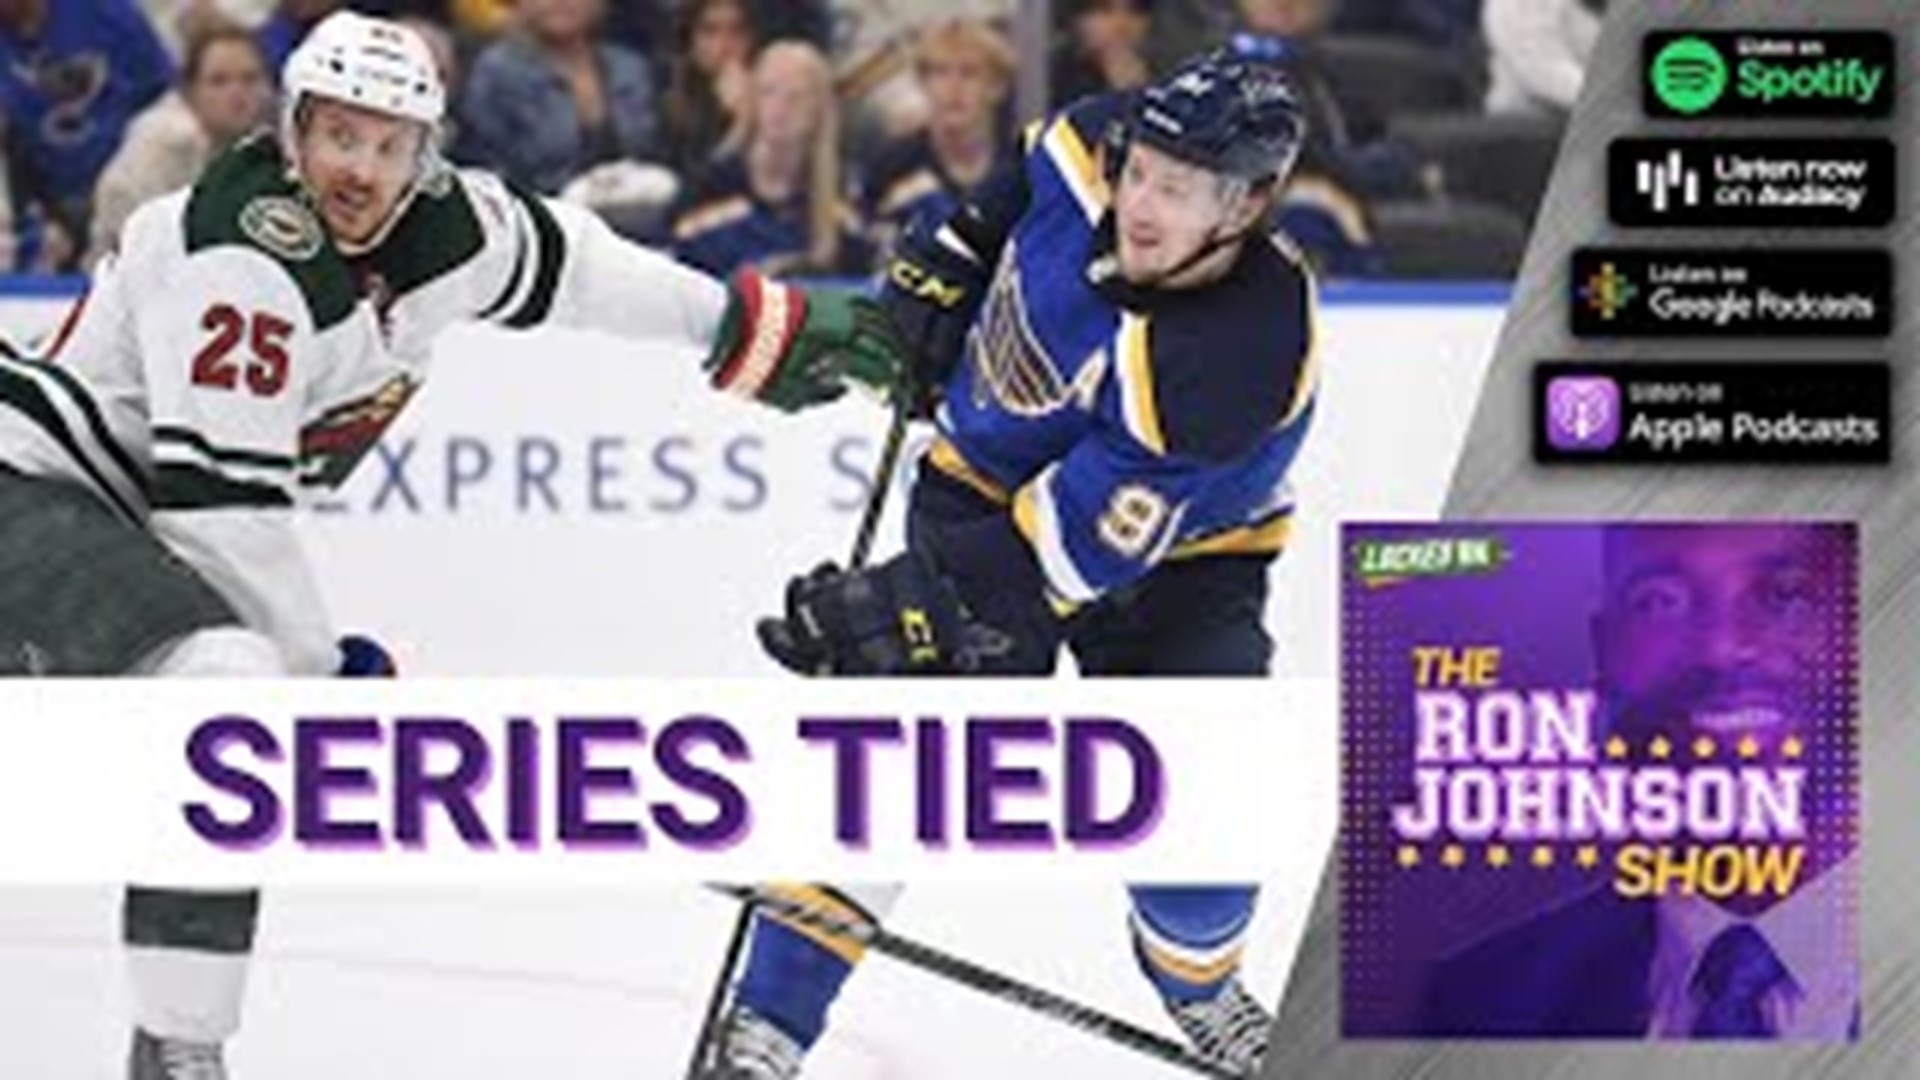 How the Minnesota Wild Can Bounce Back in Game 5 | The Ron Johnson Show